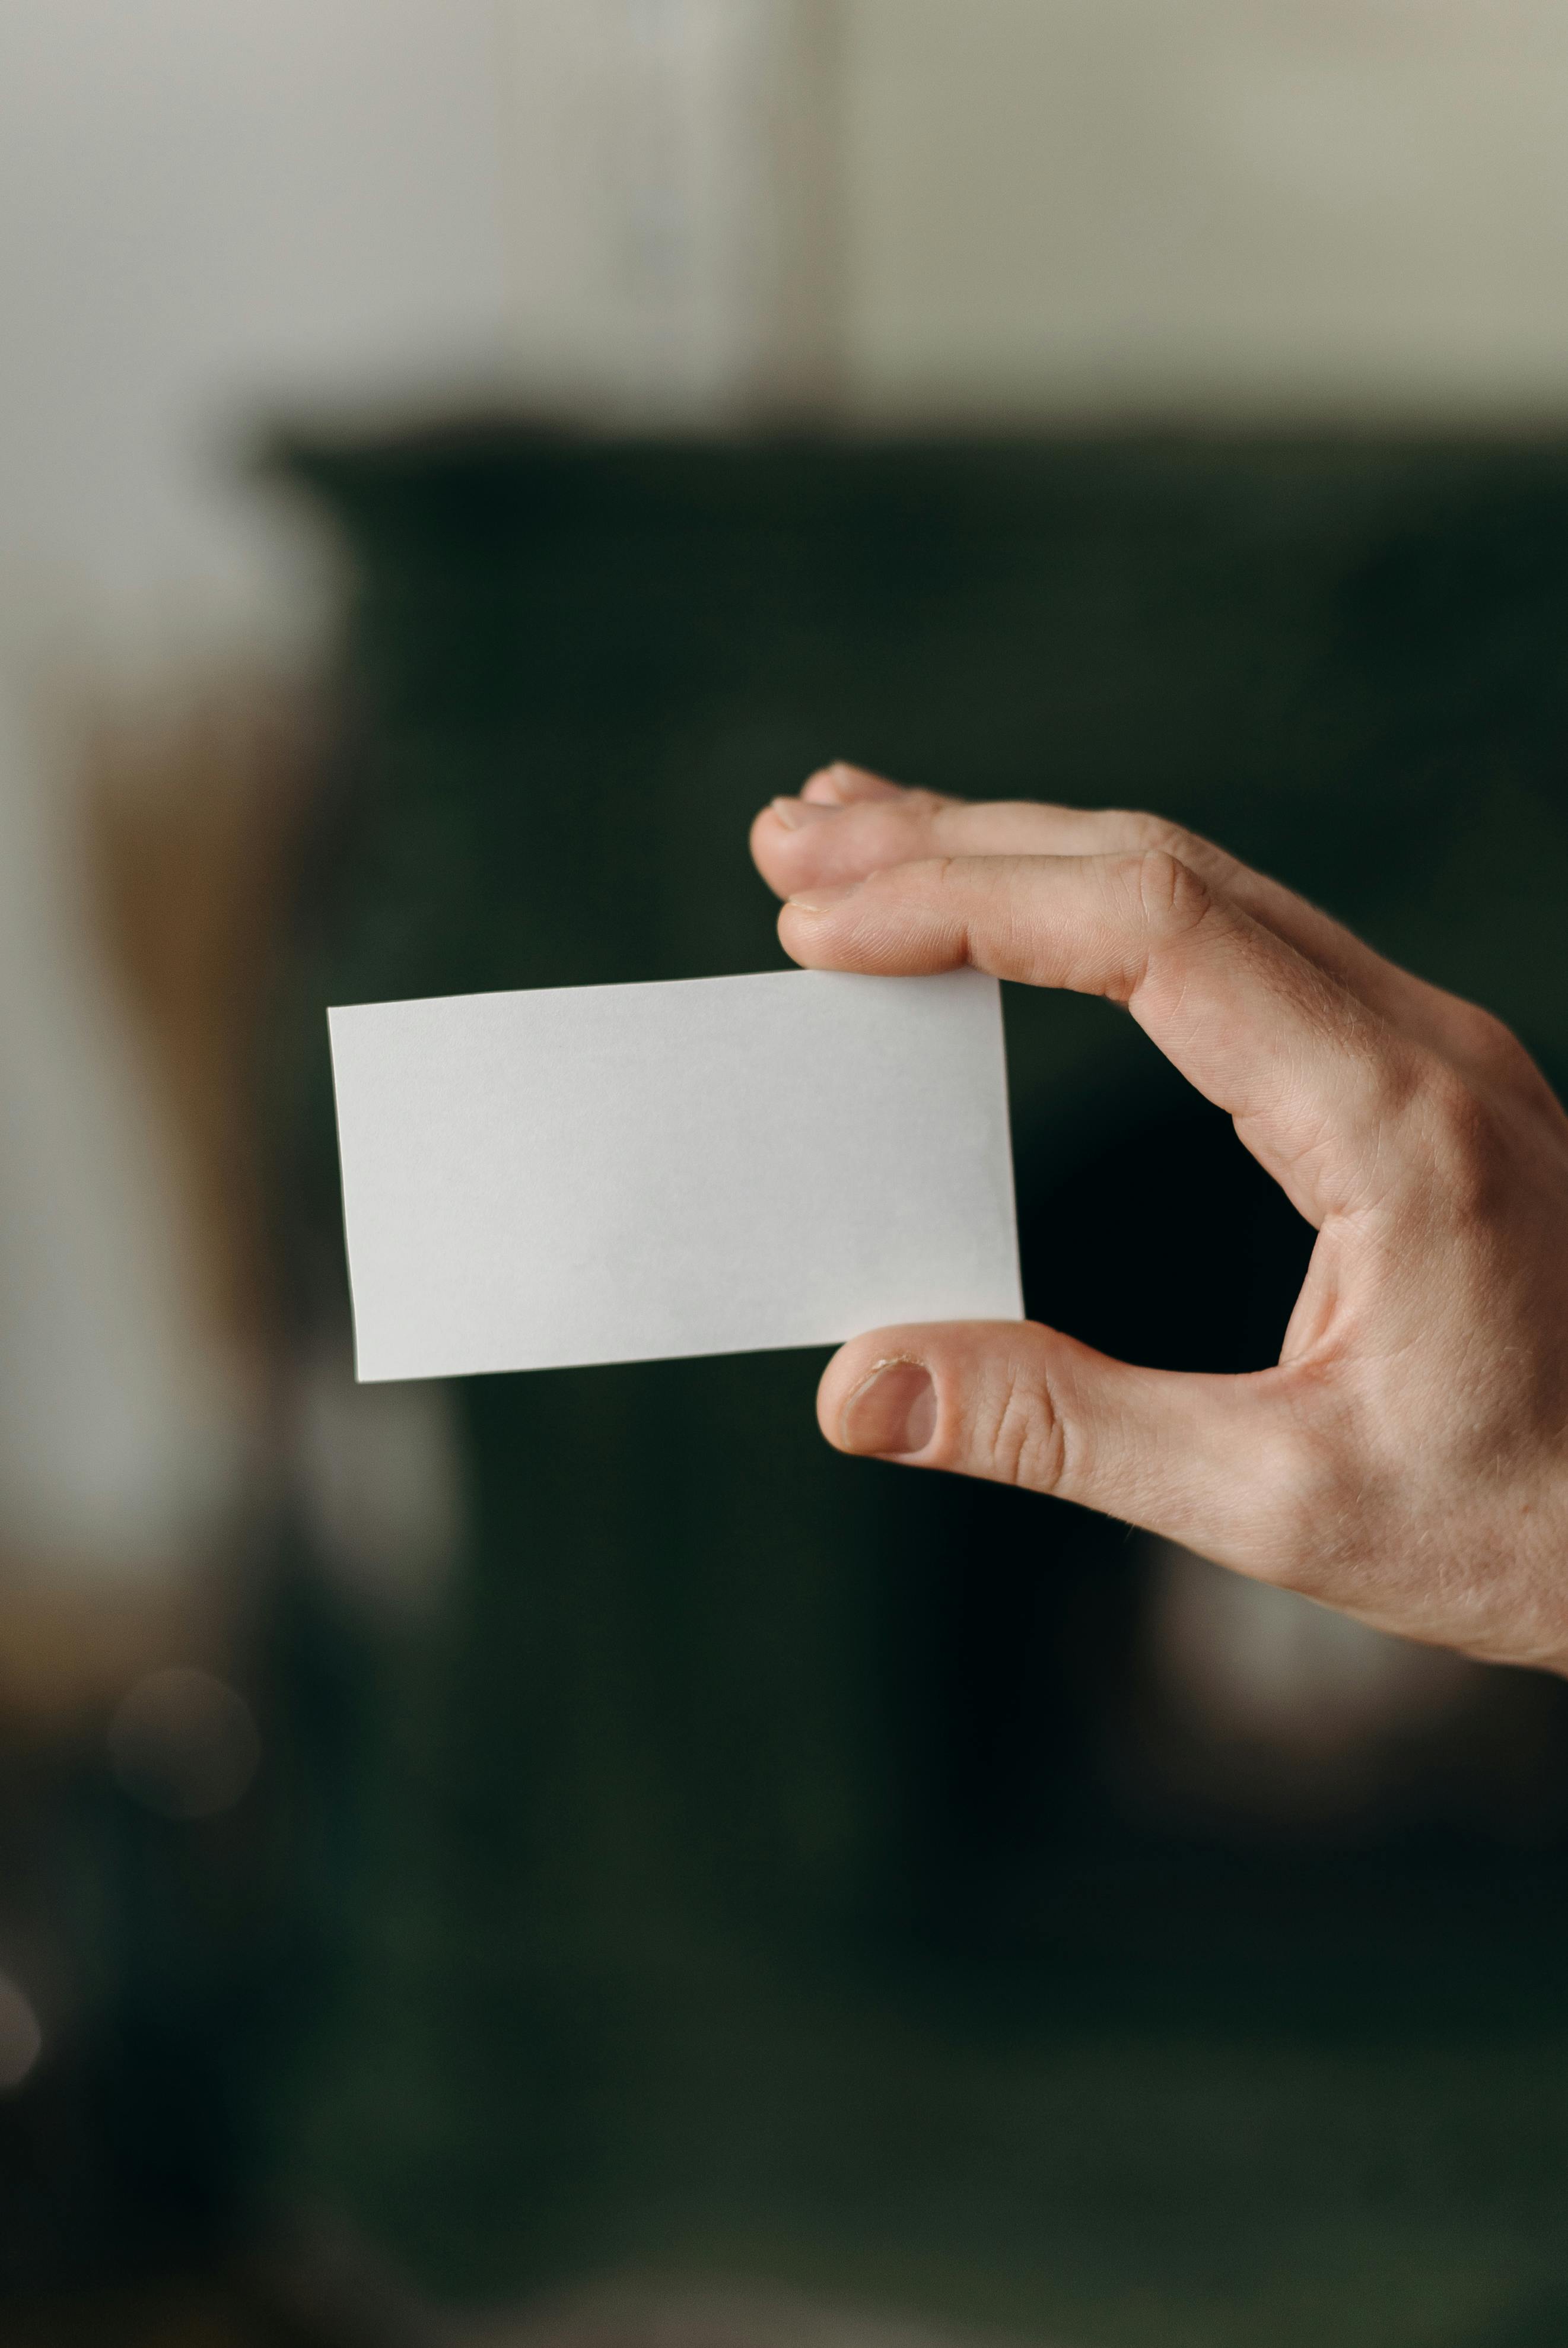 A man holding a piece of paper | Source: Pexels